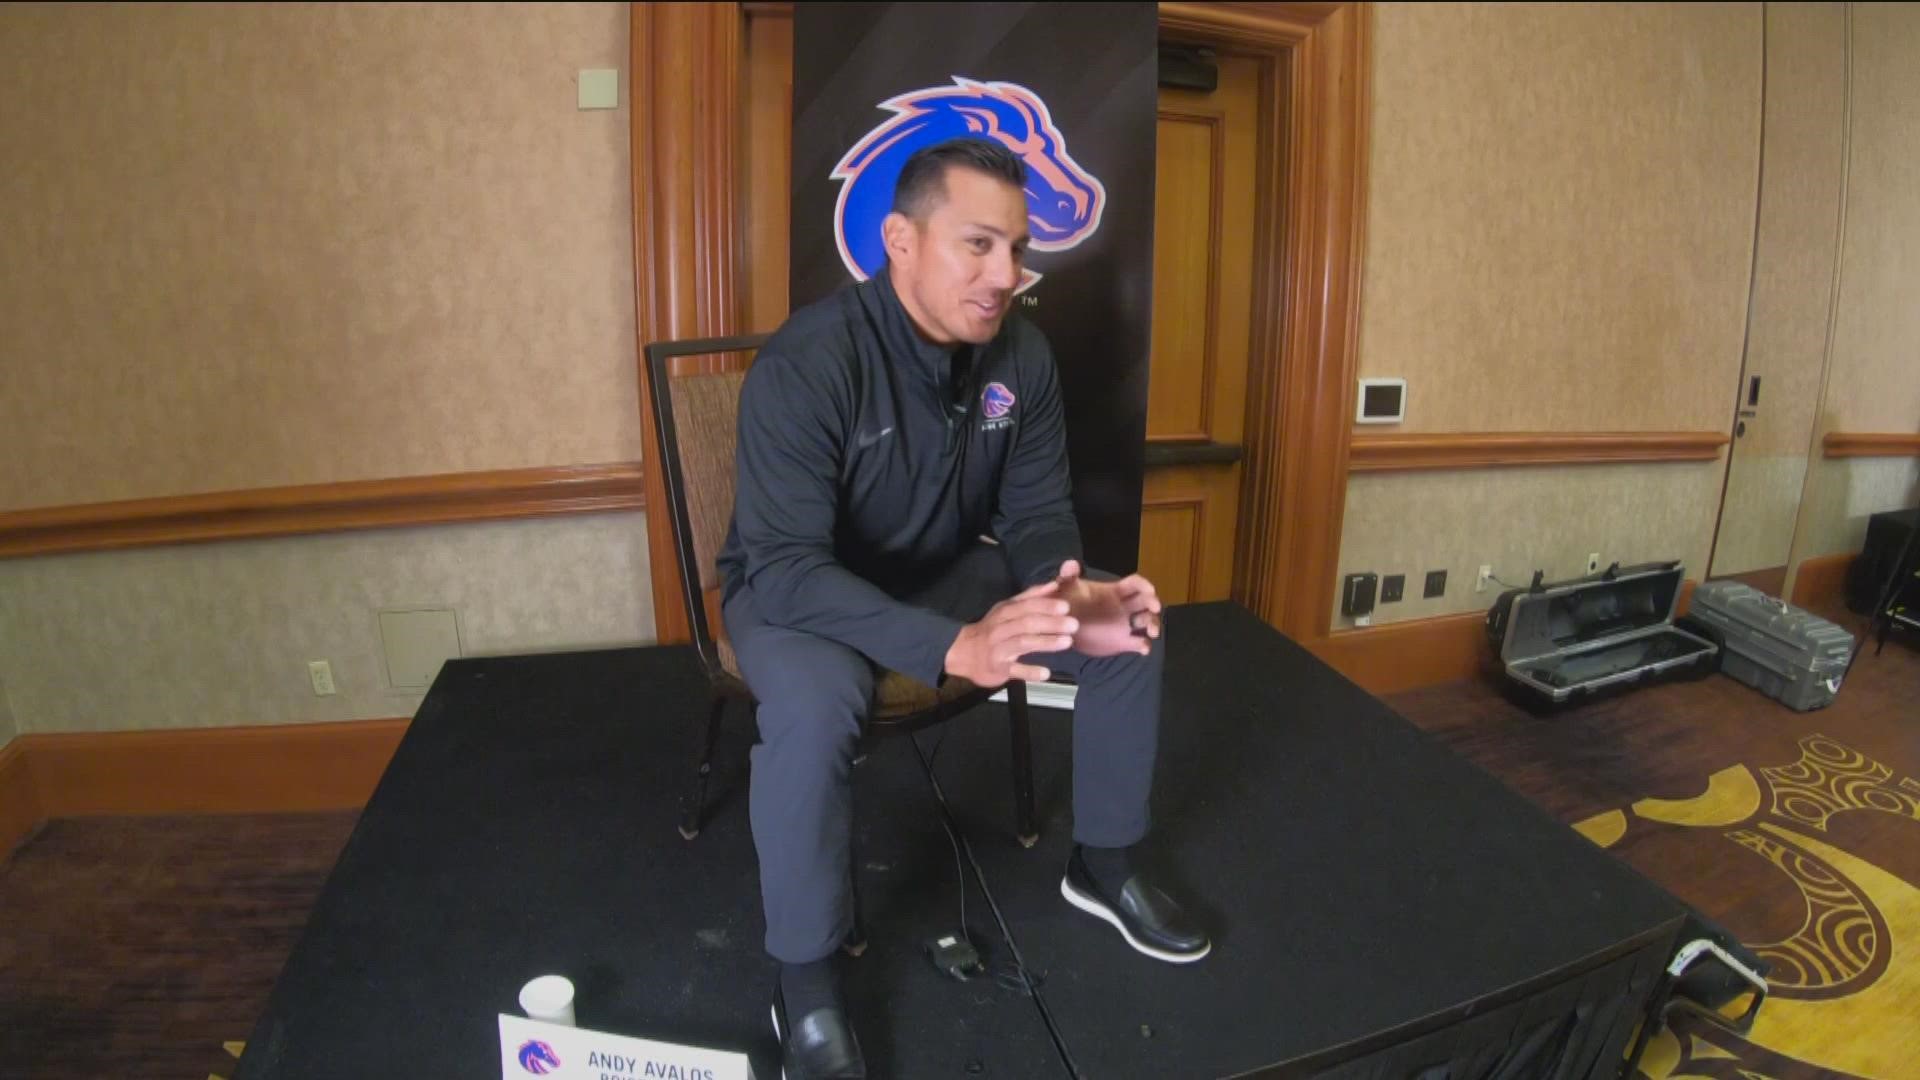 Nevada head coach Ken Wilson explains Boise State's Andy Avalos' fear for spiders, including a story from their time together at the University of Oregon.